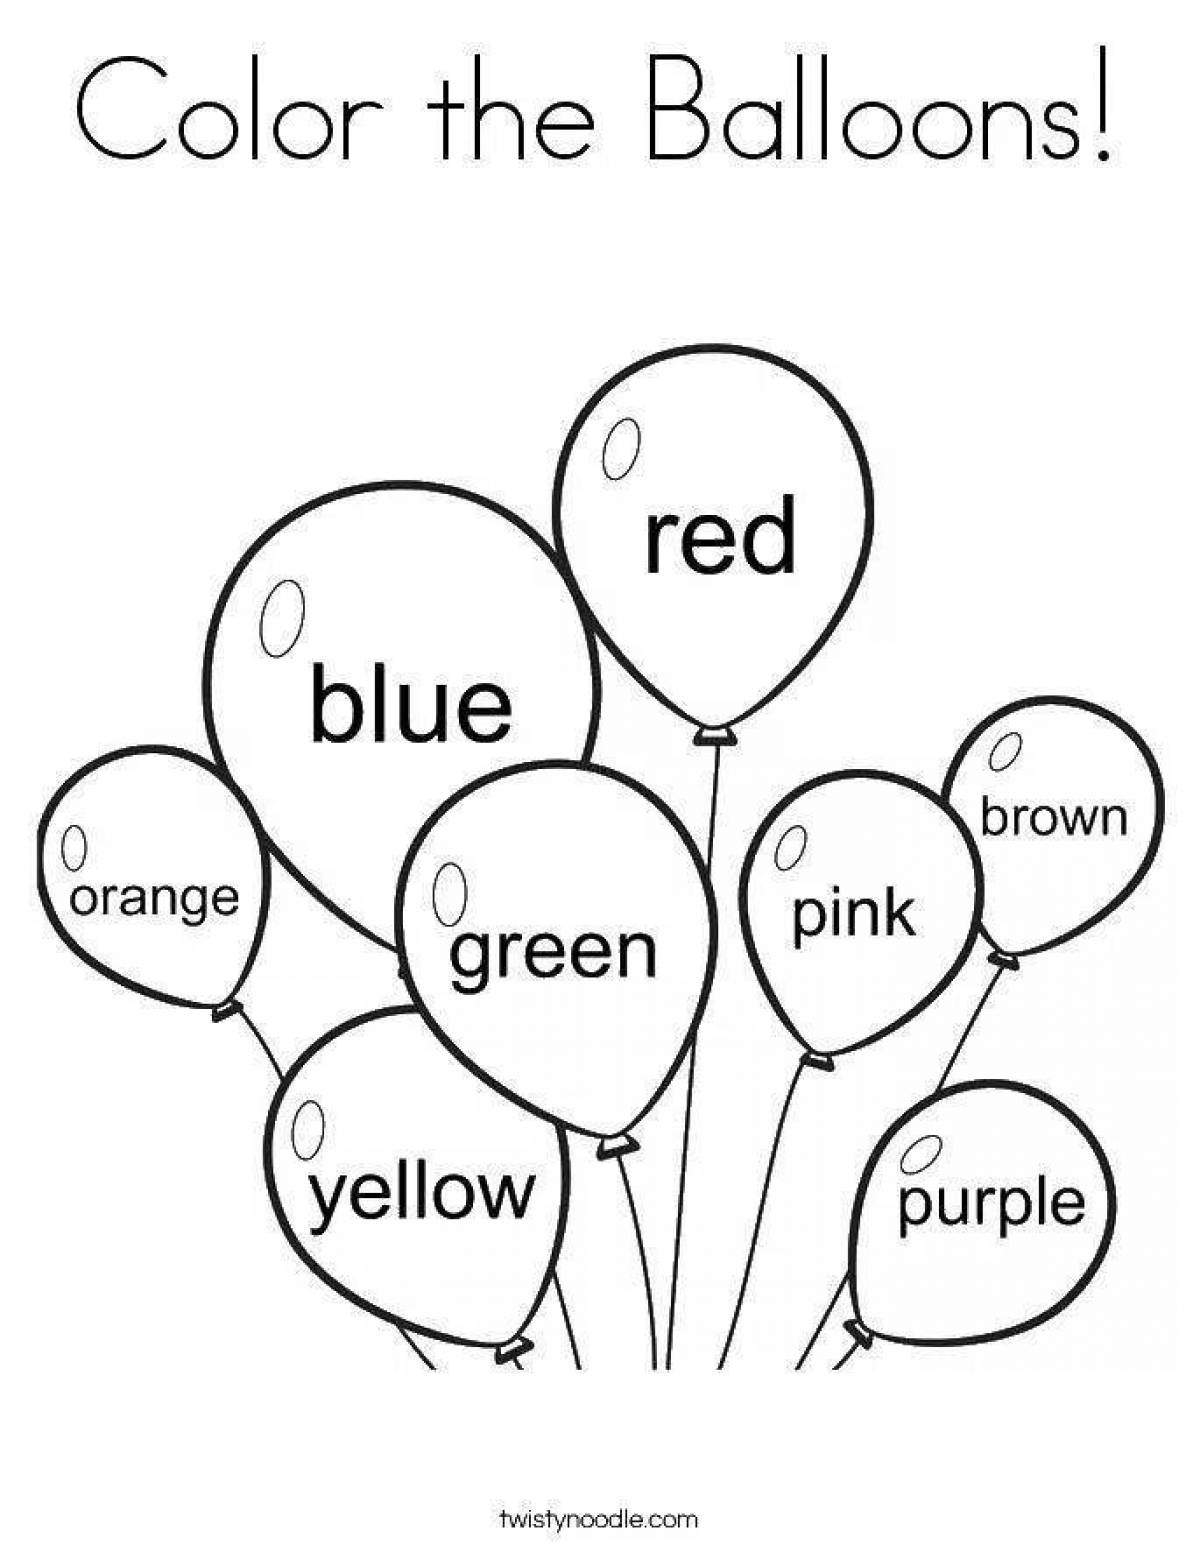 Glowing coloring pages in english for kids